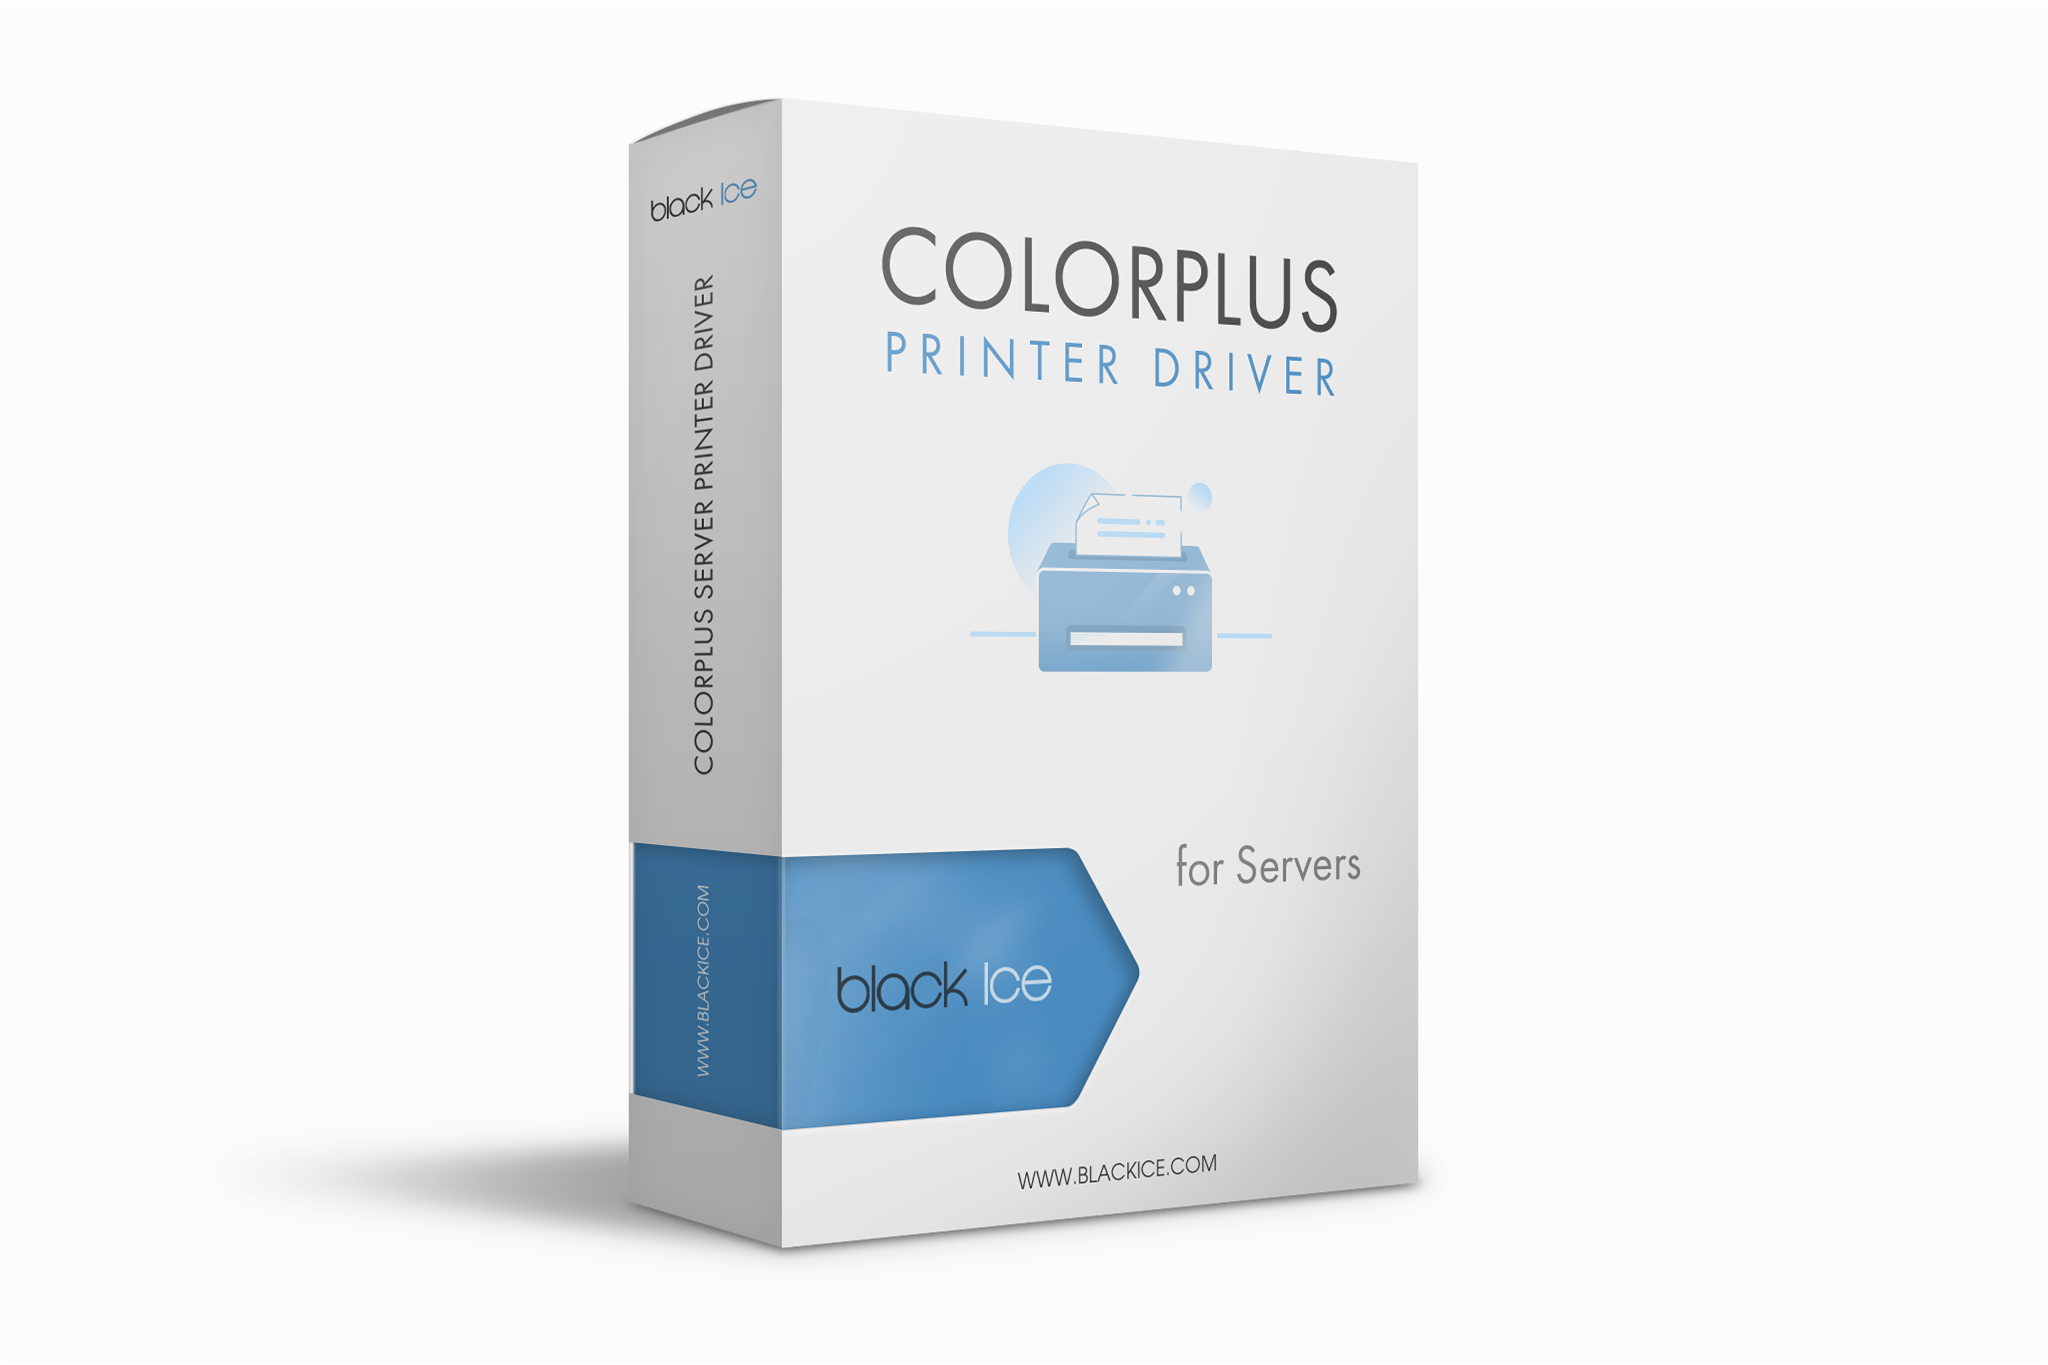 ColorPlus Printer Driver Server Subscription (Single Server and 4 multi-printers or threads)